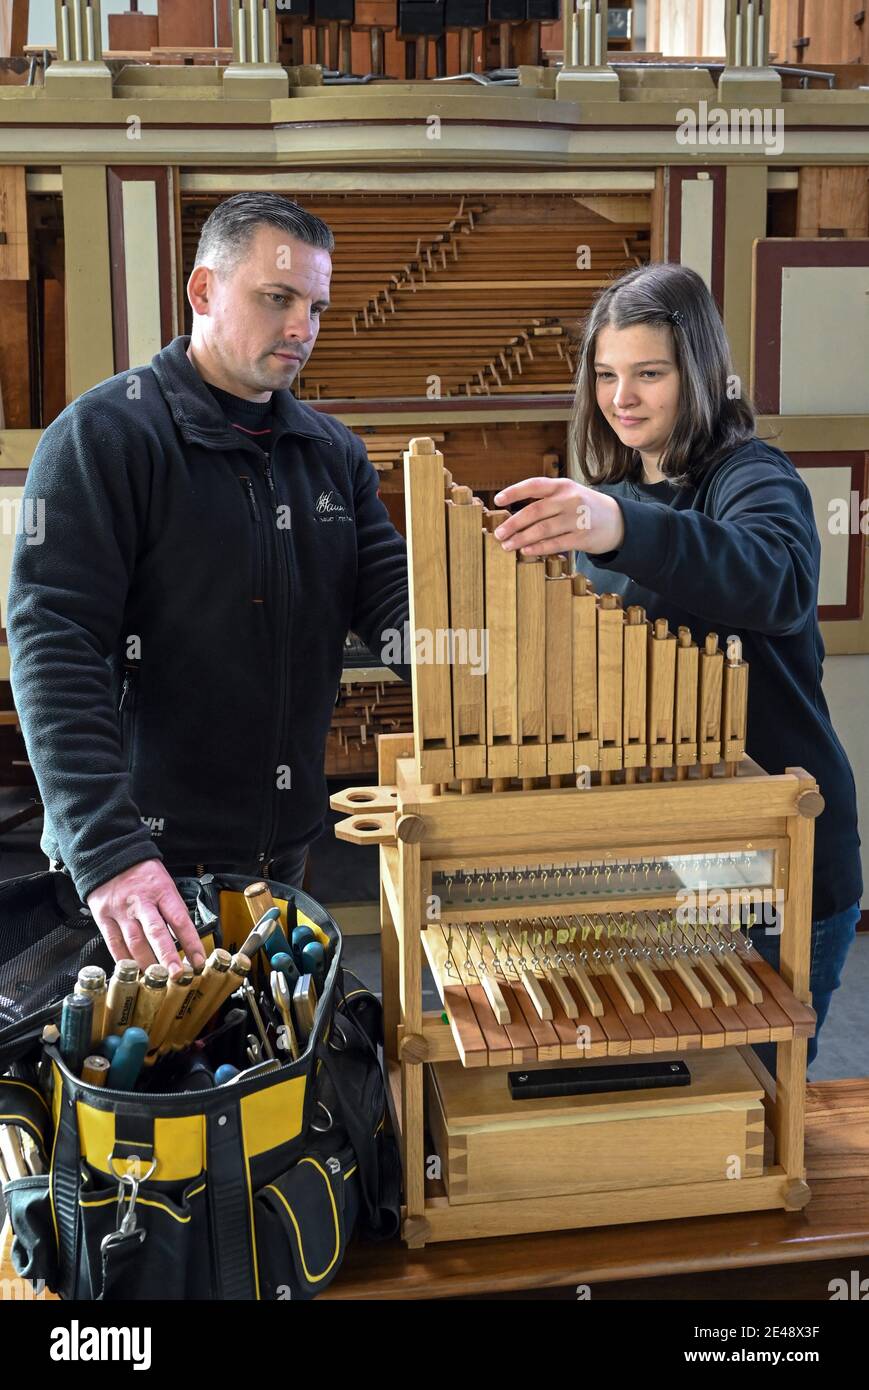 21 January 2021, Brandenburg, Müllrose: Thomas Lang, master organ builder from the company Orgelbau Sauer, and Meta März, in her 4th year of apprenticeship as an organ builder, stand next to a small mechanical modular organ. The organ is the instrument of the year 2021. Preservation and good sound have a tradition in East Brandenburg. There are three organ building companies, an expert, 350 instruments as well as a great interest to increase the public awareness. Photo: Patrick Pleul/dpa-Zentralbild/ZB Stock Photo